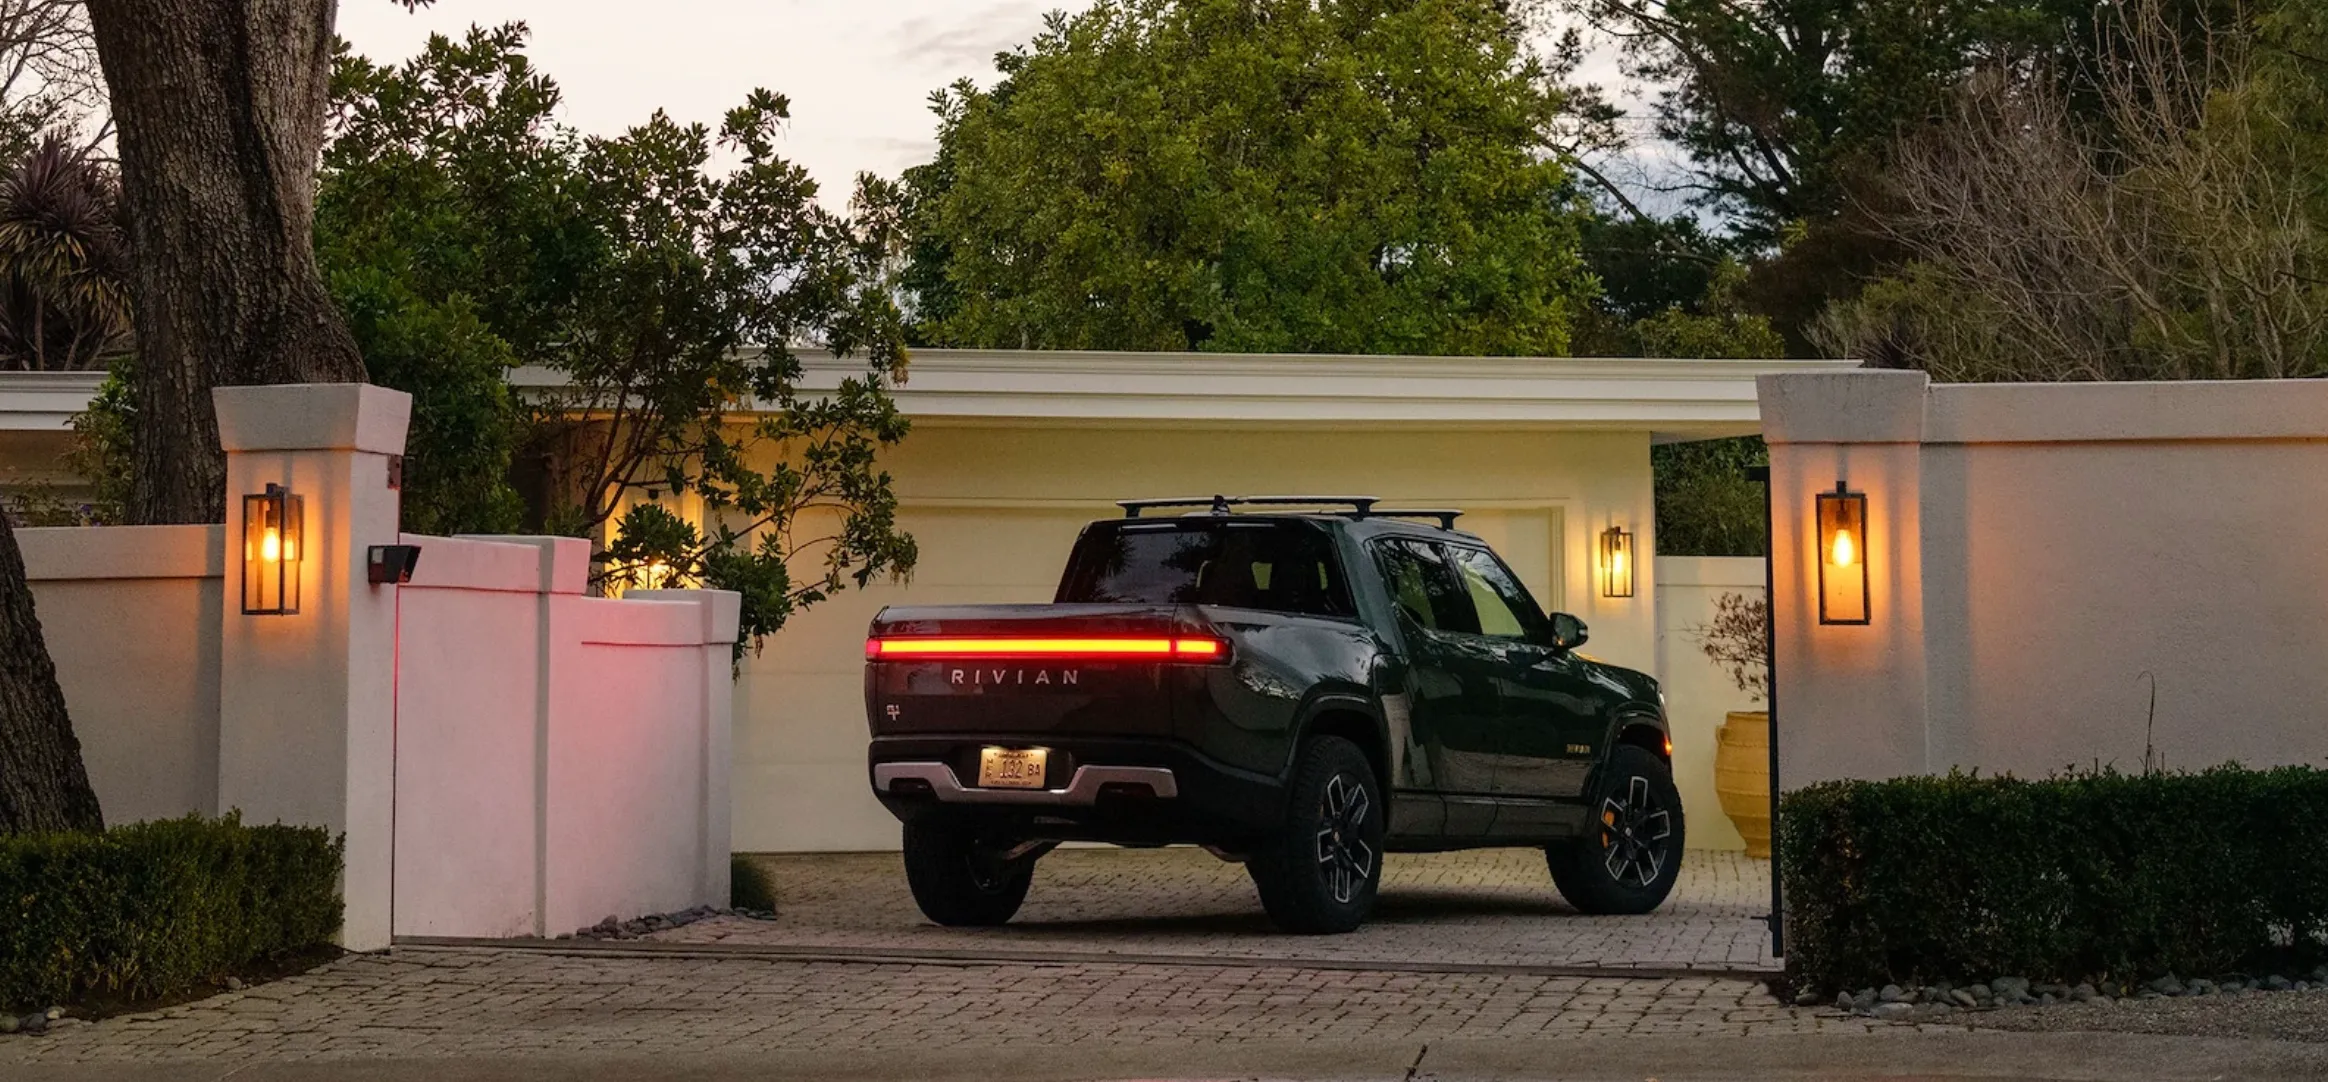 Startup company Rivian plans to build a second factory in the United States.